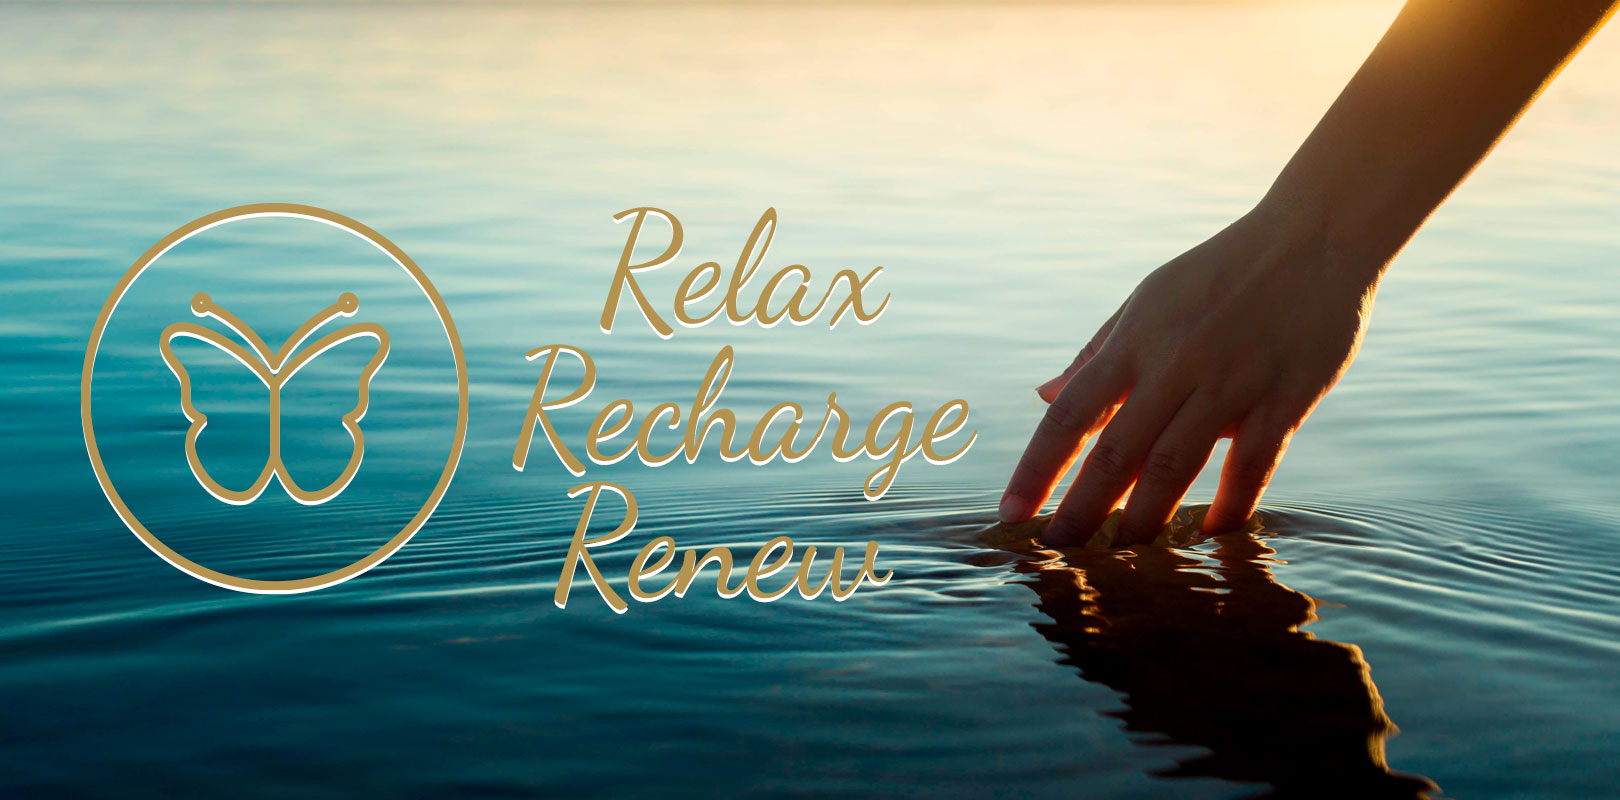 Relaxation Massage for Wellbeing